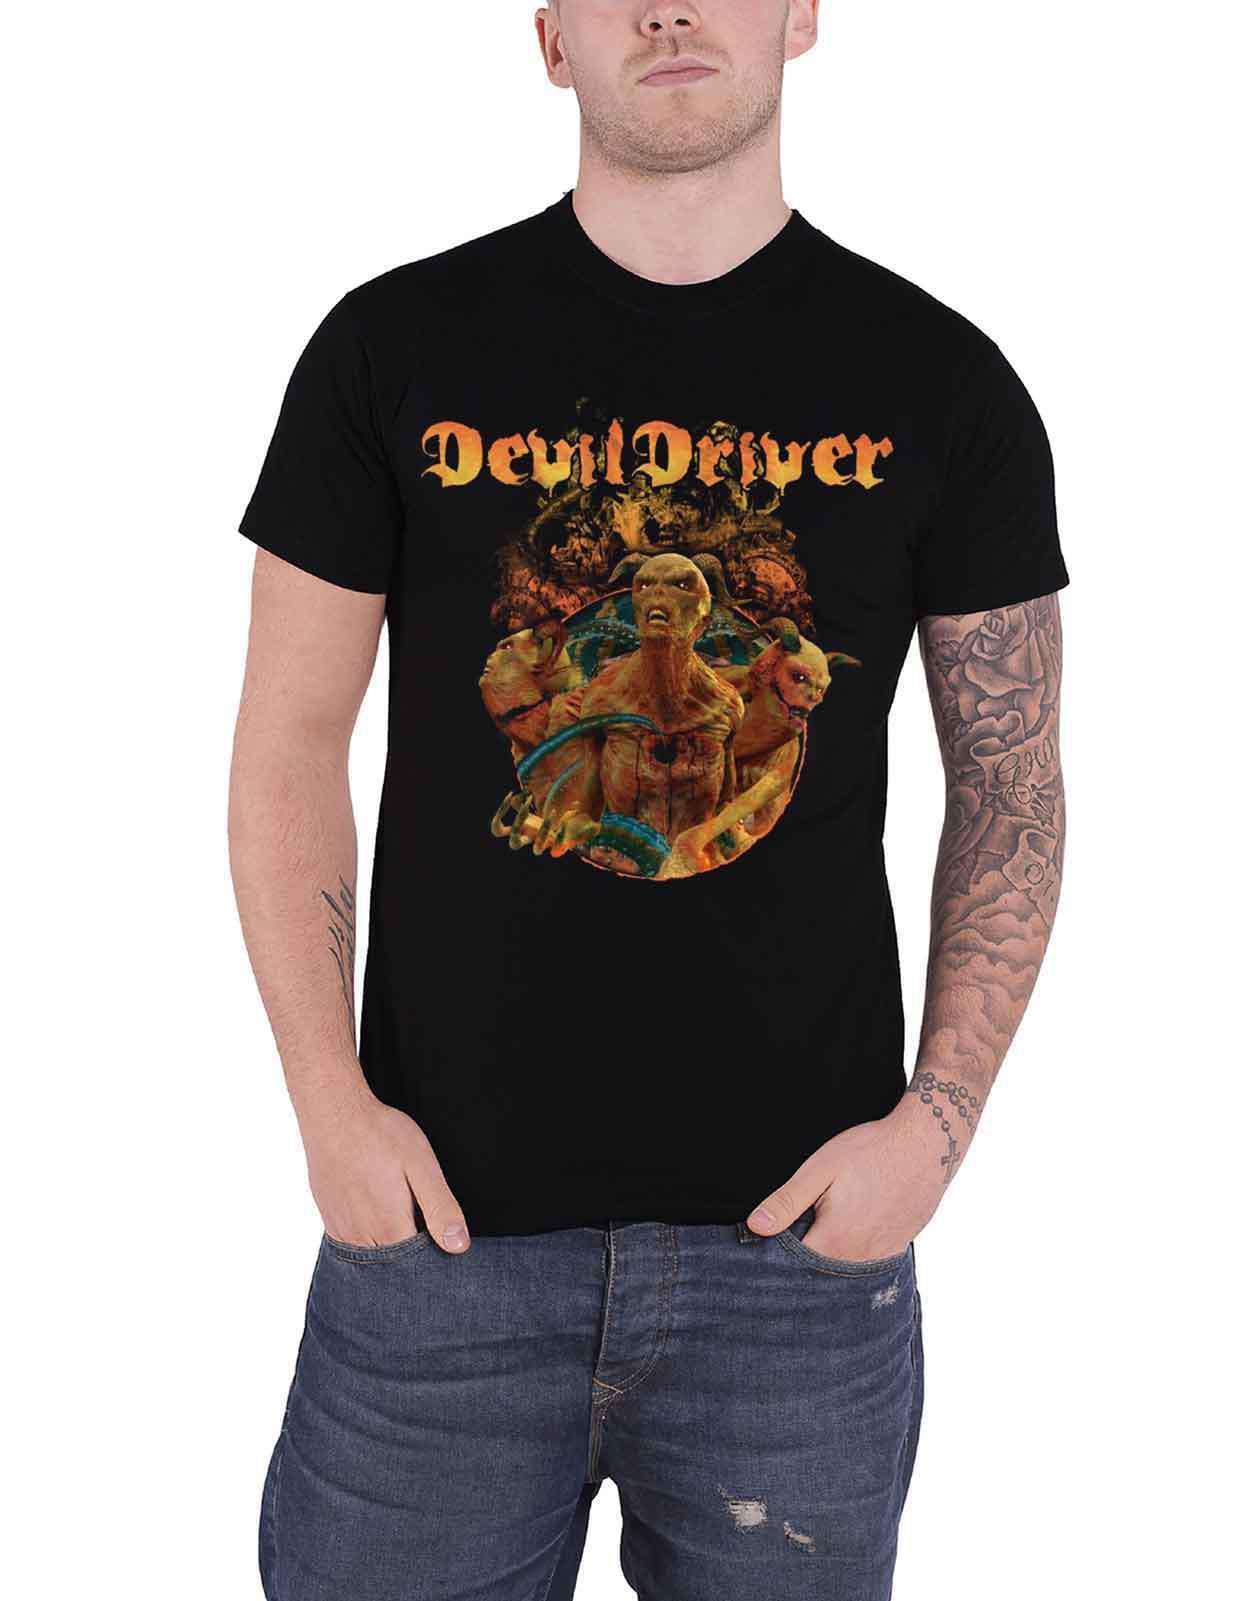 DevilDriver T Shirt Keep Away from Me Band Logo new Official Mens Black